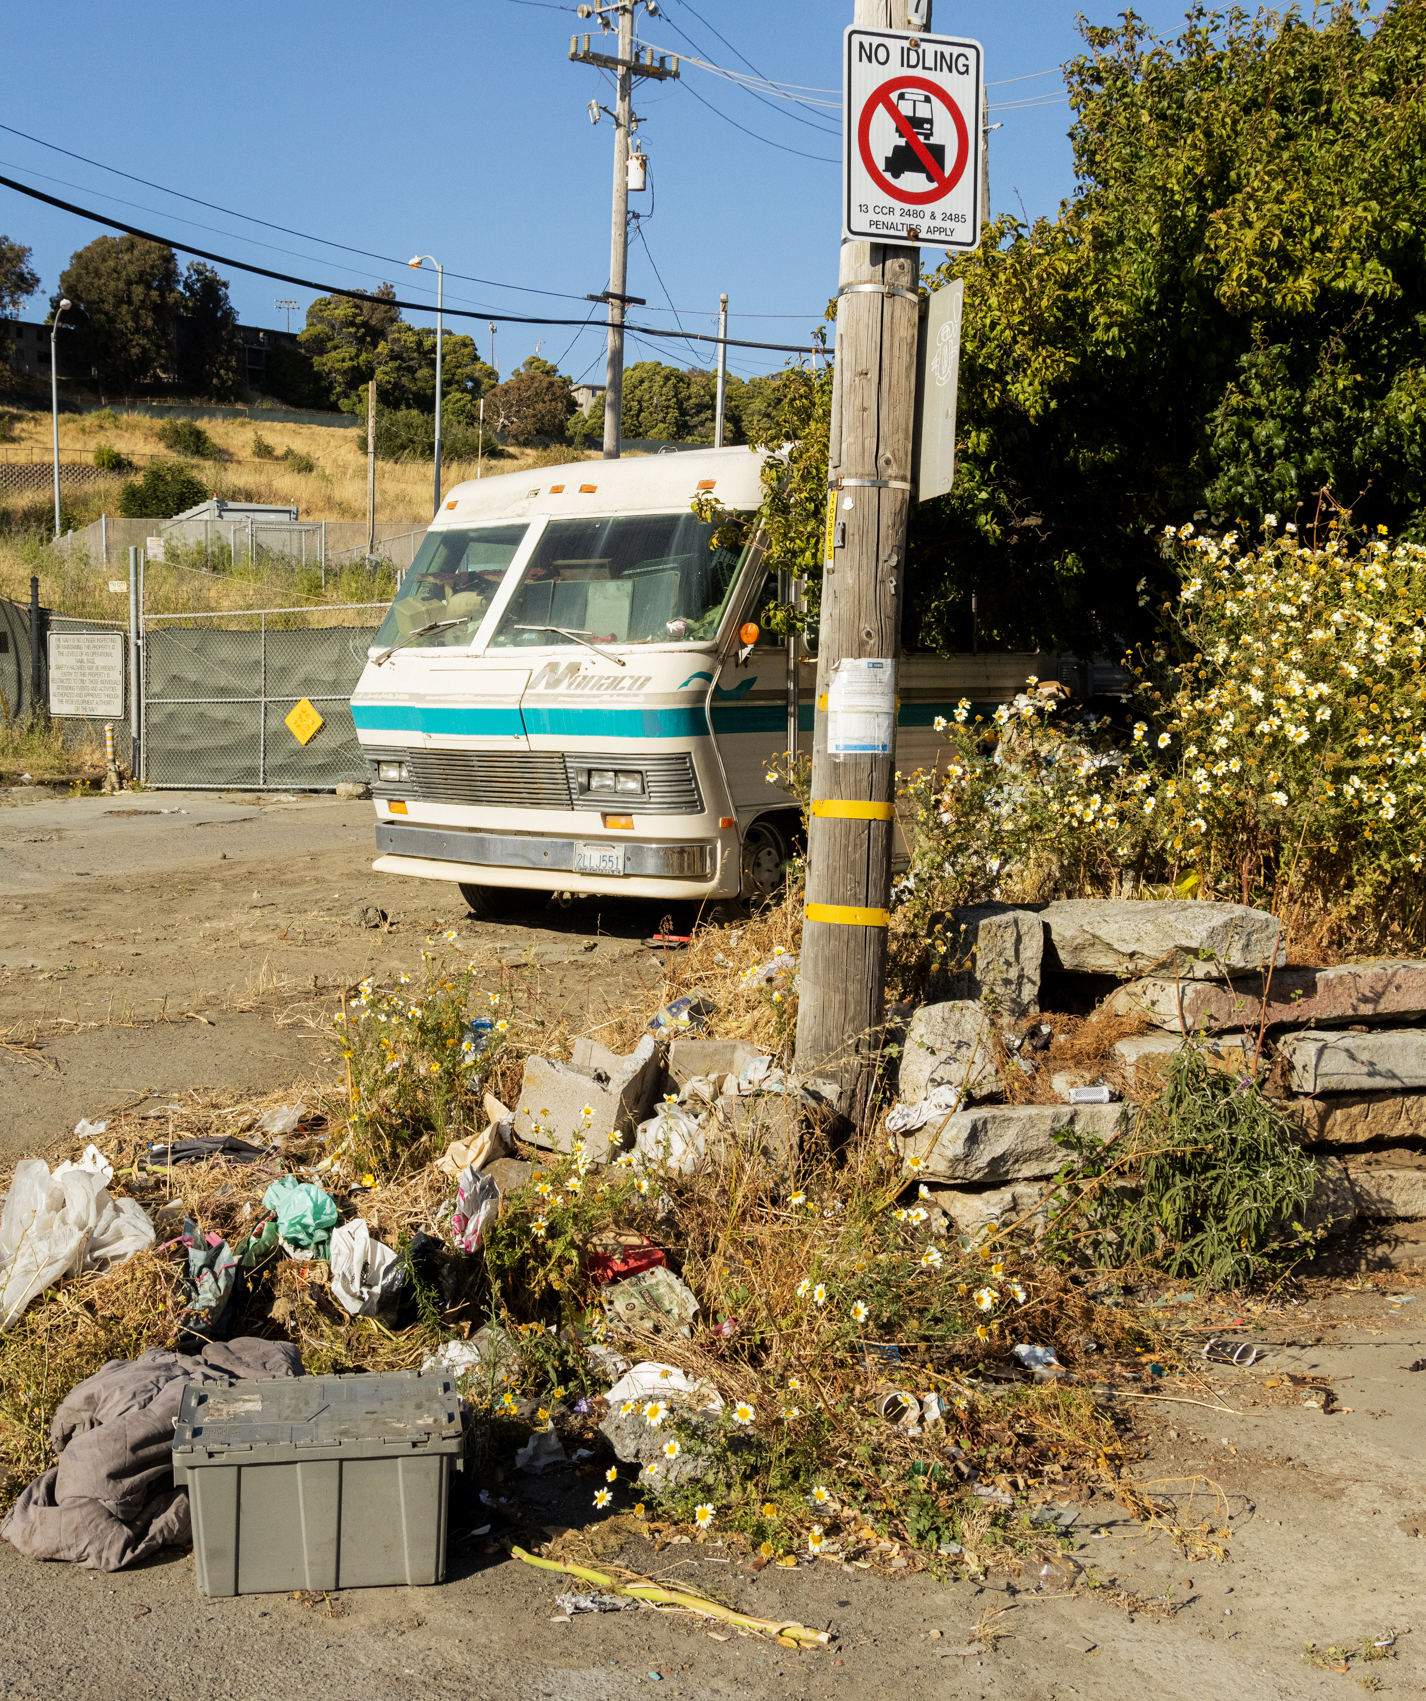 The image shows a weathered RV parked beside a dirt road near a telephone pole with a &quot;No Idling&quot; sign. There is trash and overgrown plants in the foreground.